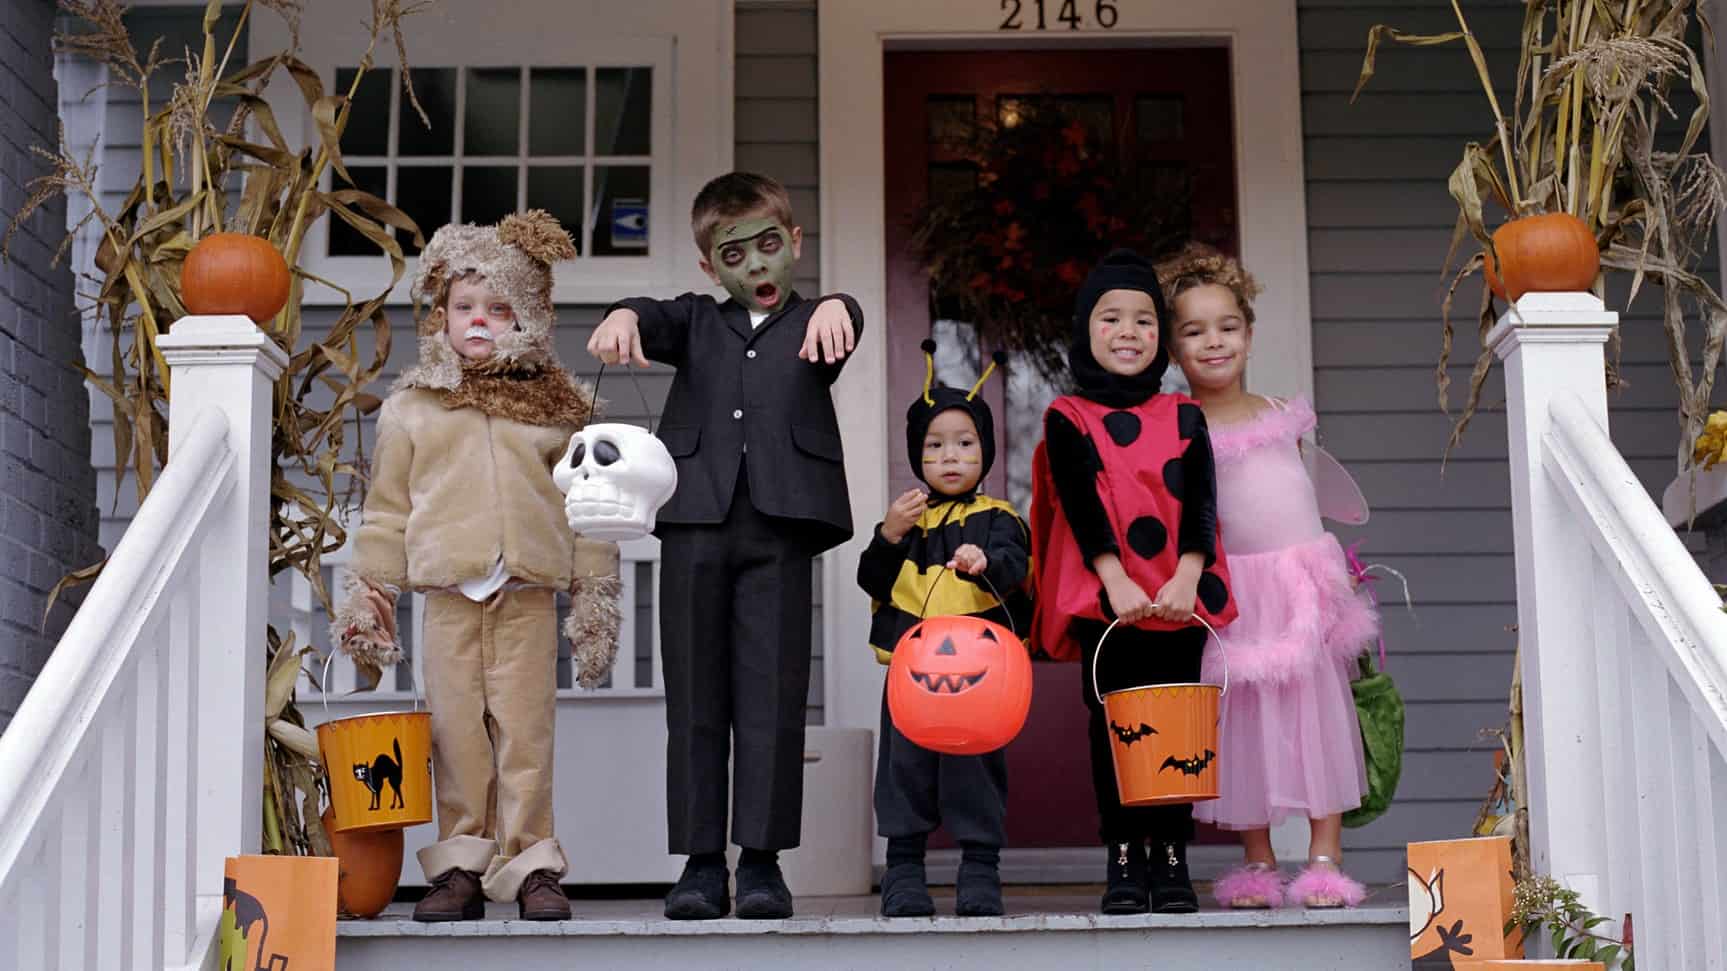 Kids in spooky costumes line up on a deck for Halloween